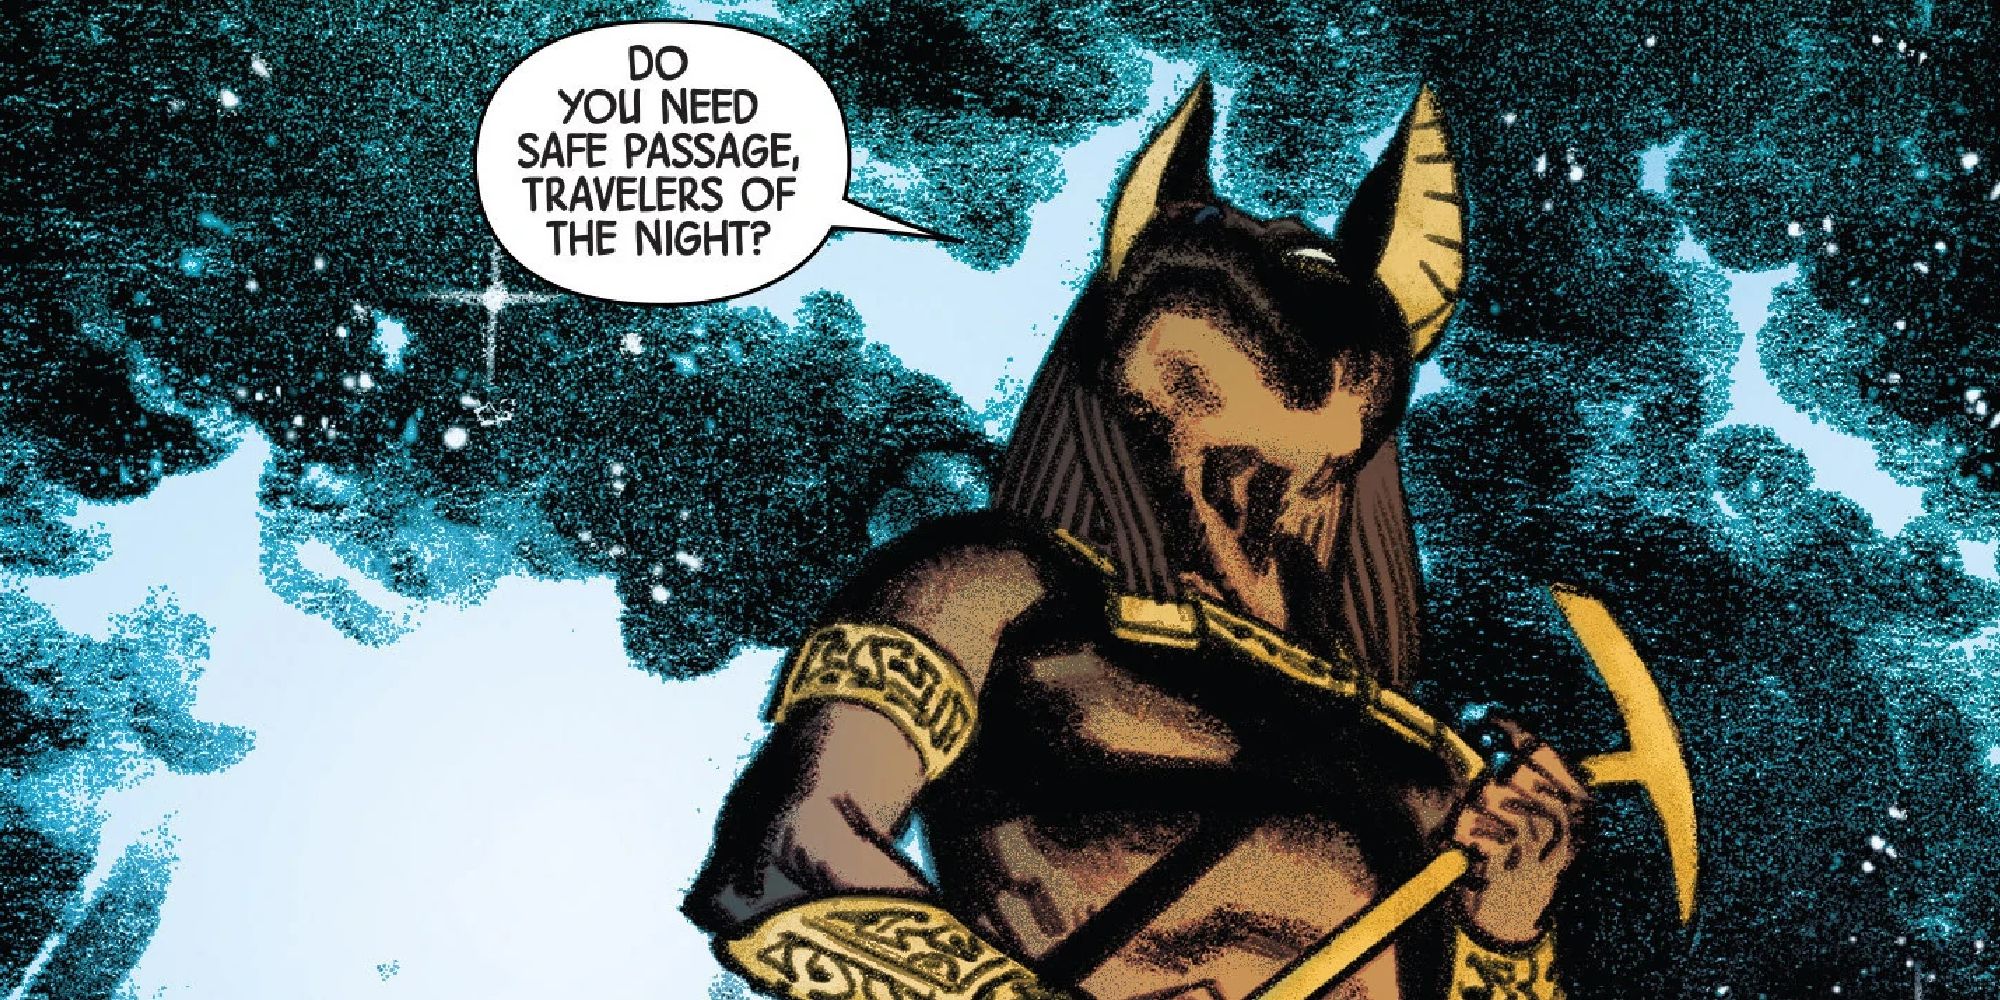 Anubis holding a sceptre in the Duat guiding travelers of the night in Marvel Comics